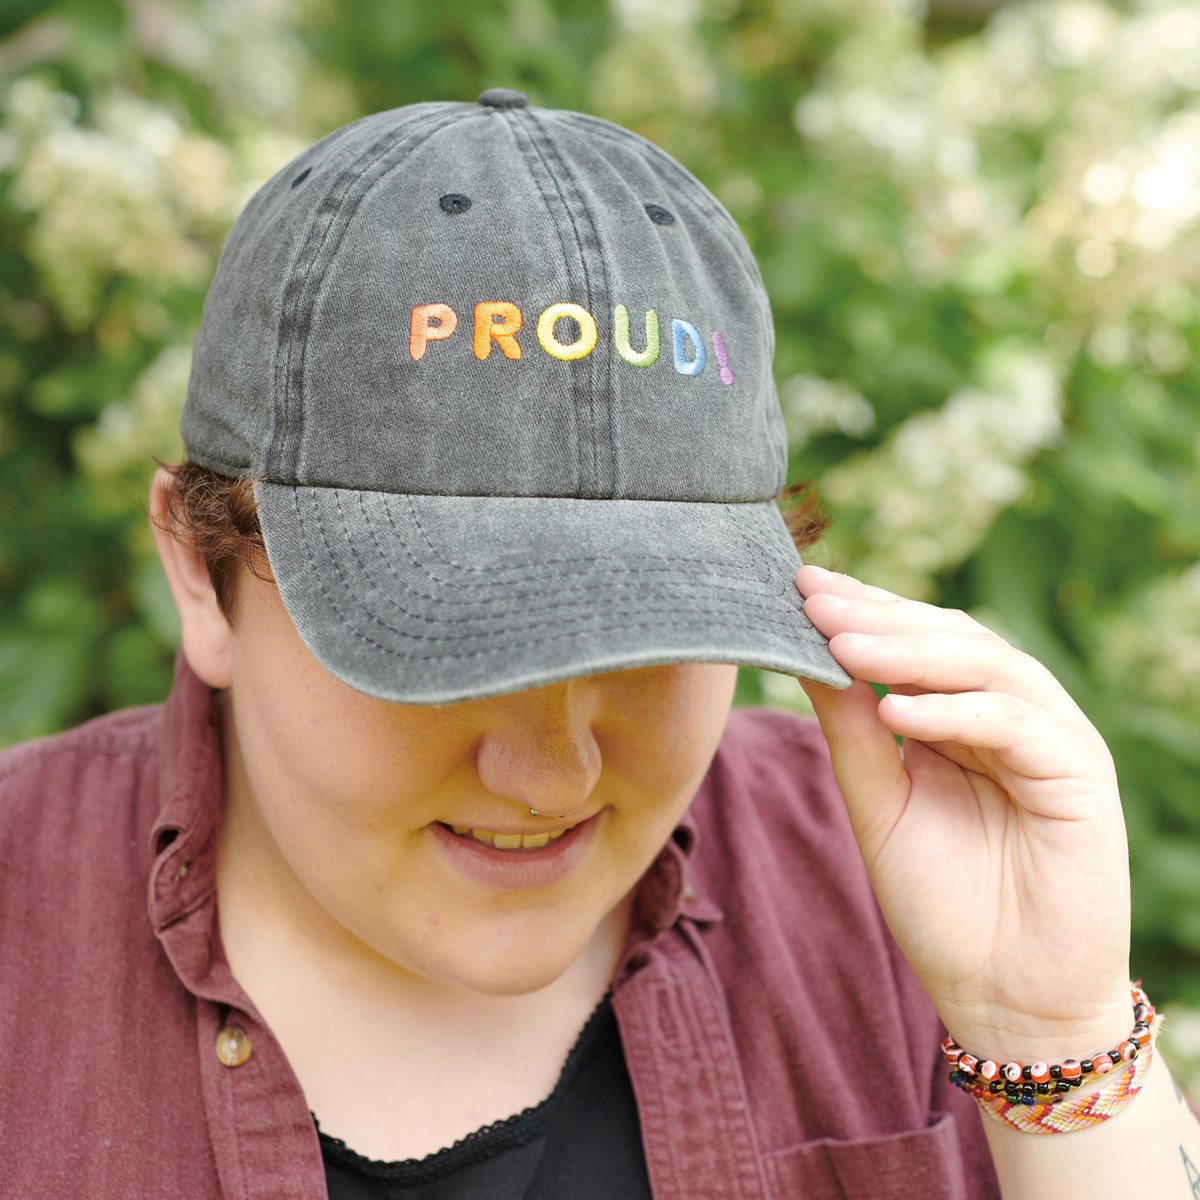 Baseball Cap - Proud - One Size Fits Most - Cotton, Metal